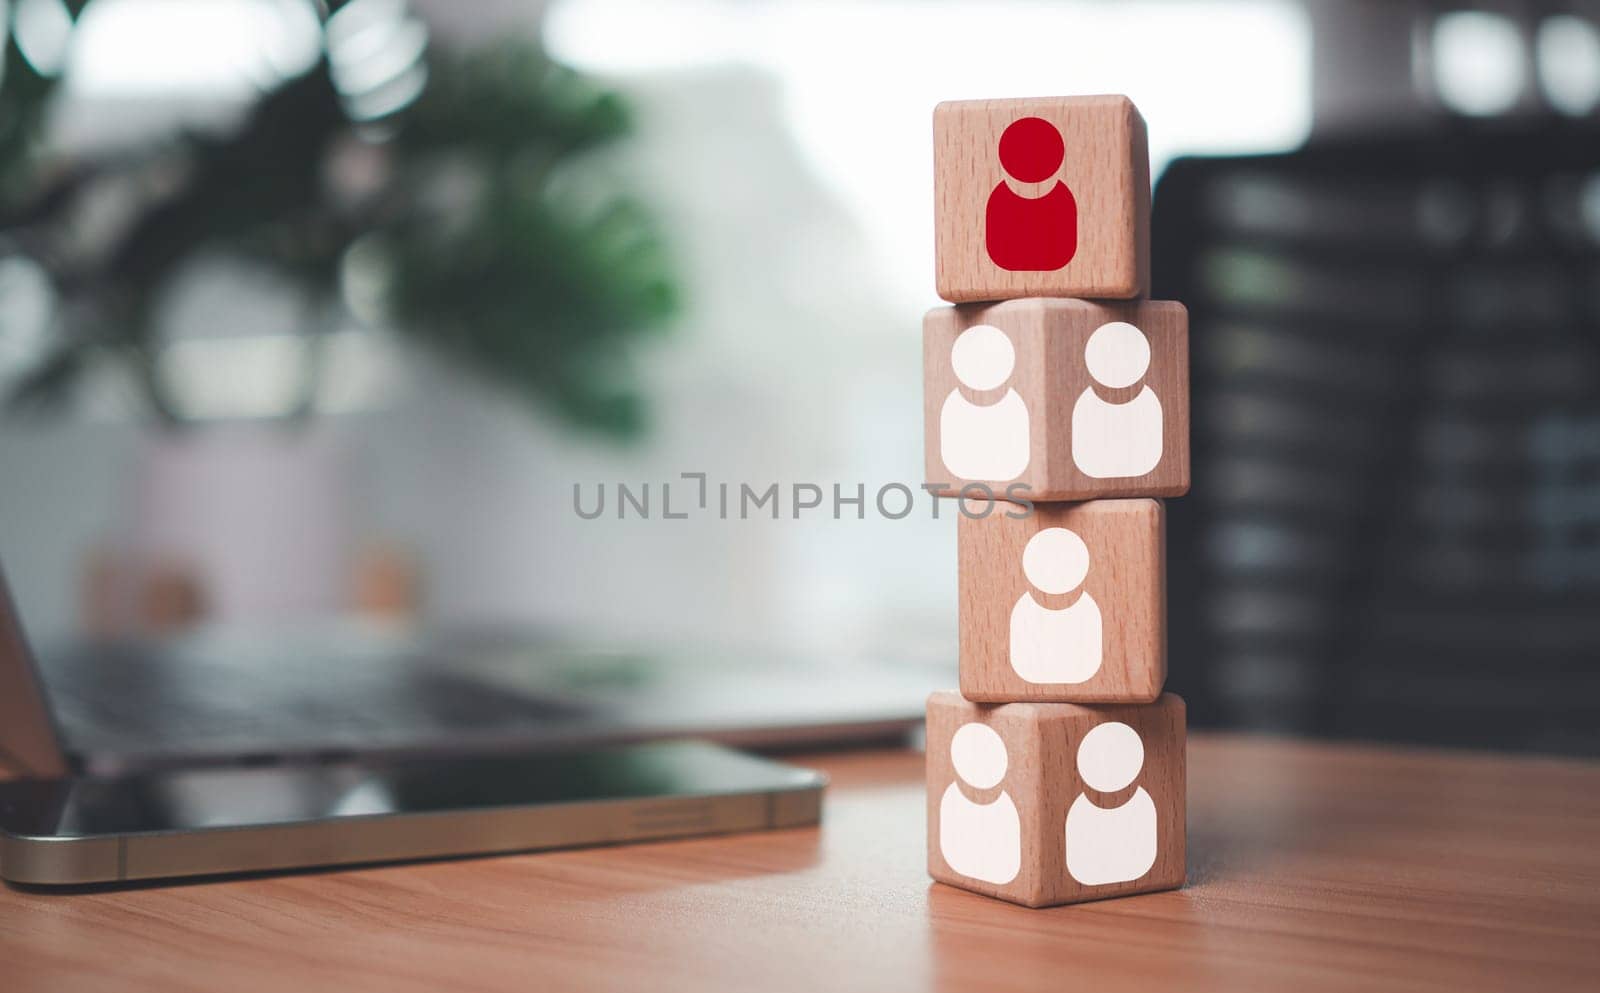 One wooden block has leadership and stands out with red manager icon placed on table as human resource management concept for leadership and teamwork. by Unimages2527